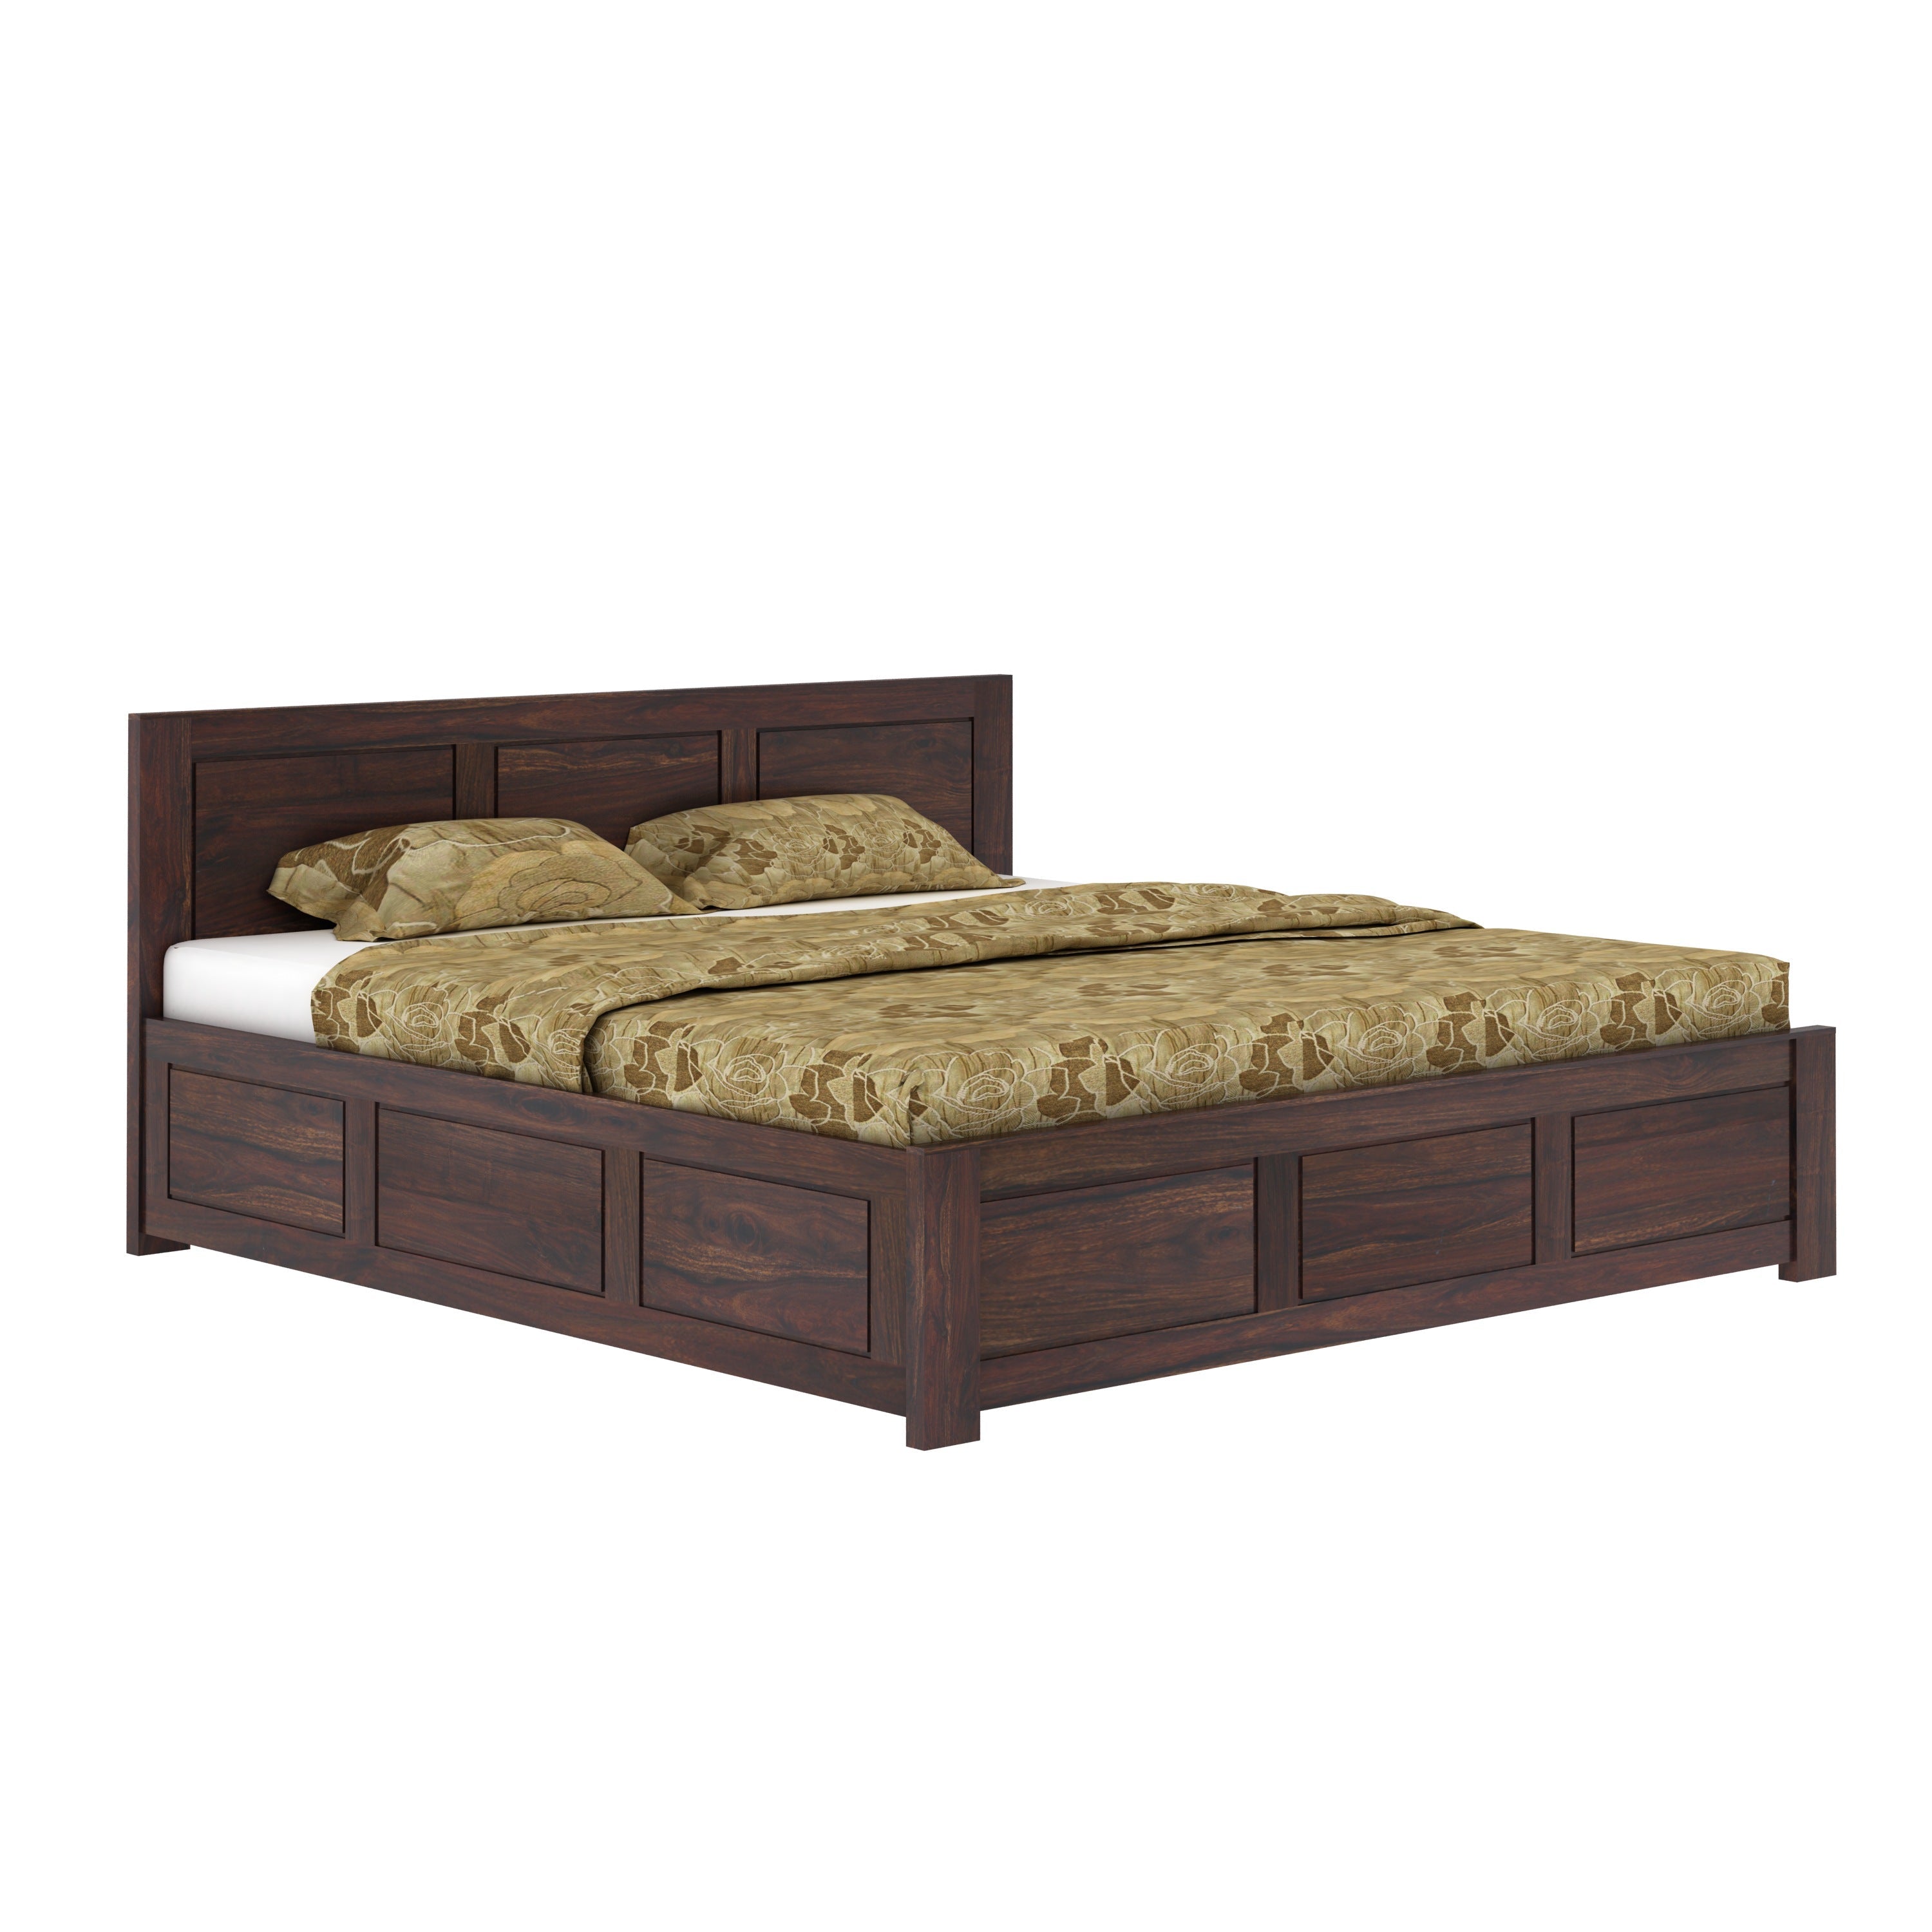 Woodwing Solid Sheesham Wood Bed With Box Storage (Queen Size, Walnut Finish)